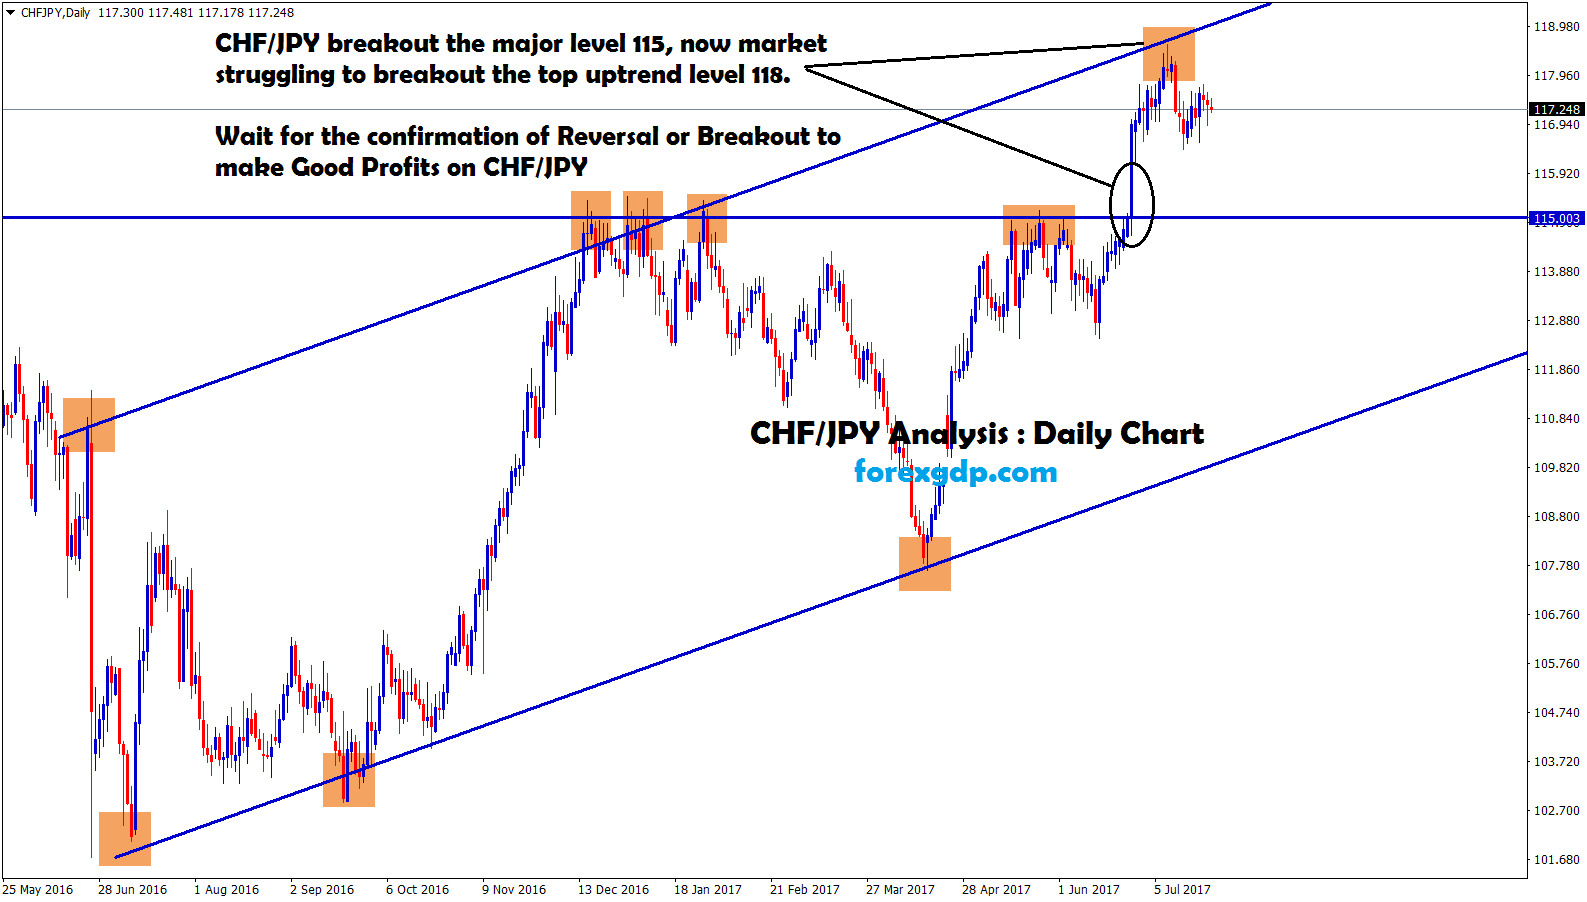 CHFJPY breakout the major level 115 and reached the top level of trend line 118